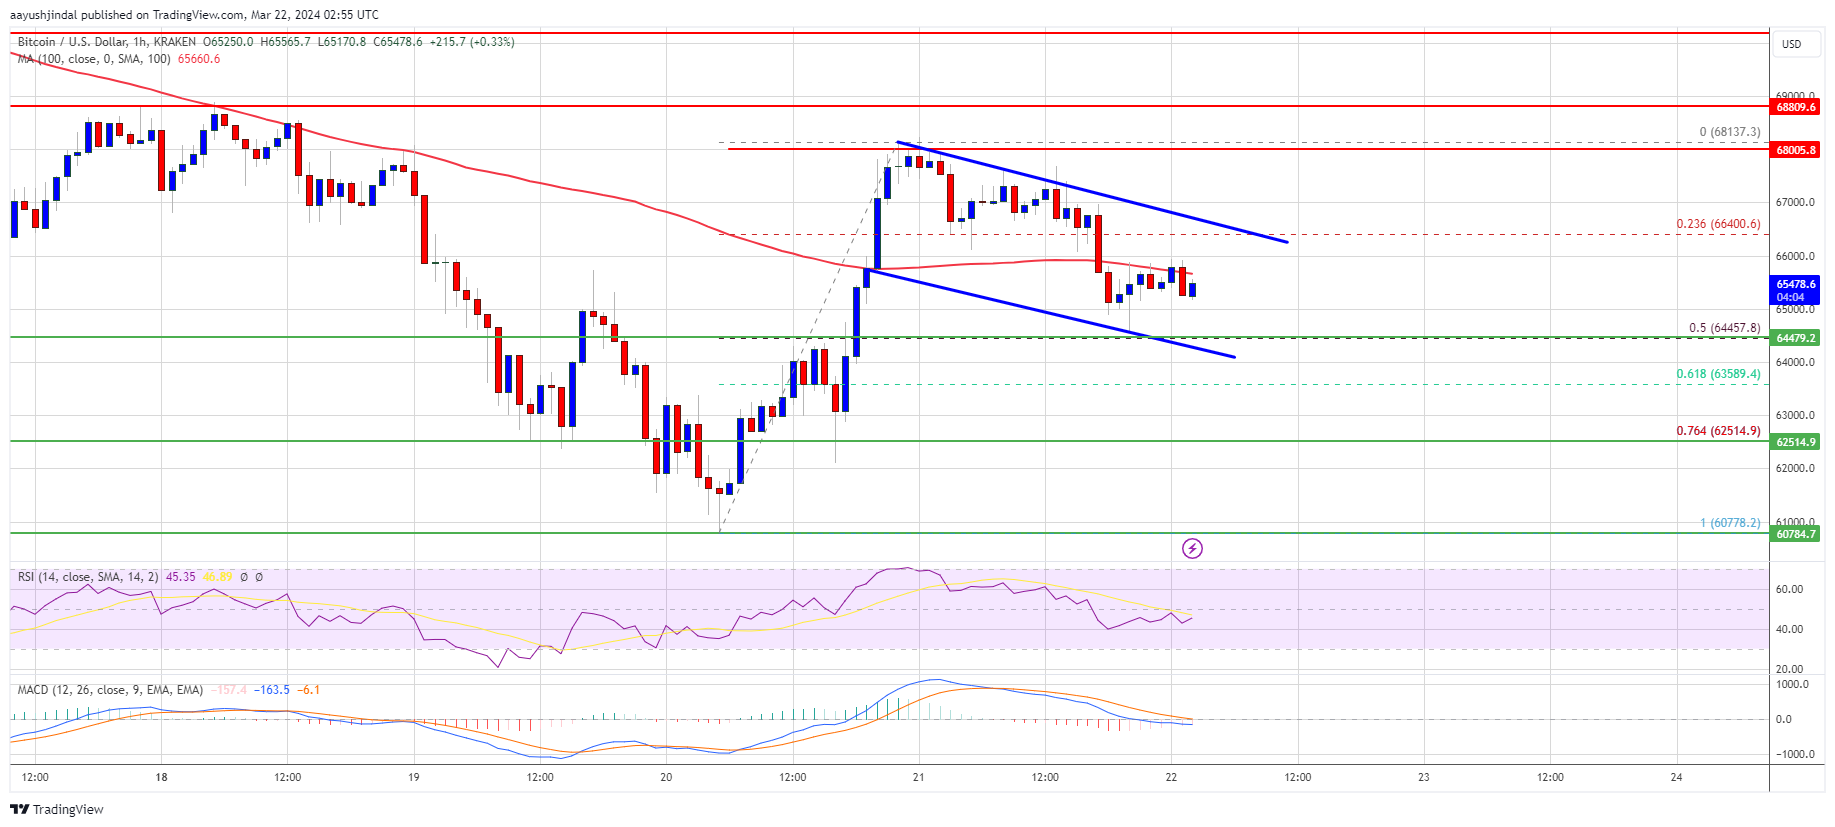 Bitcoin Price Rejects K, Indicators Signal Fresh Downside To K